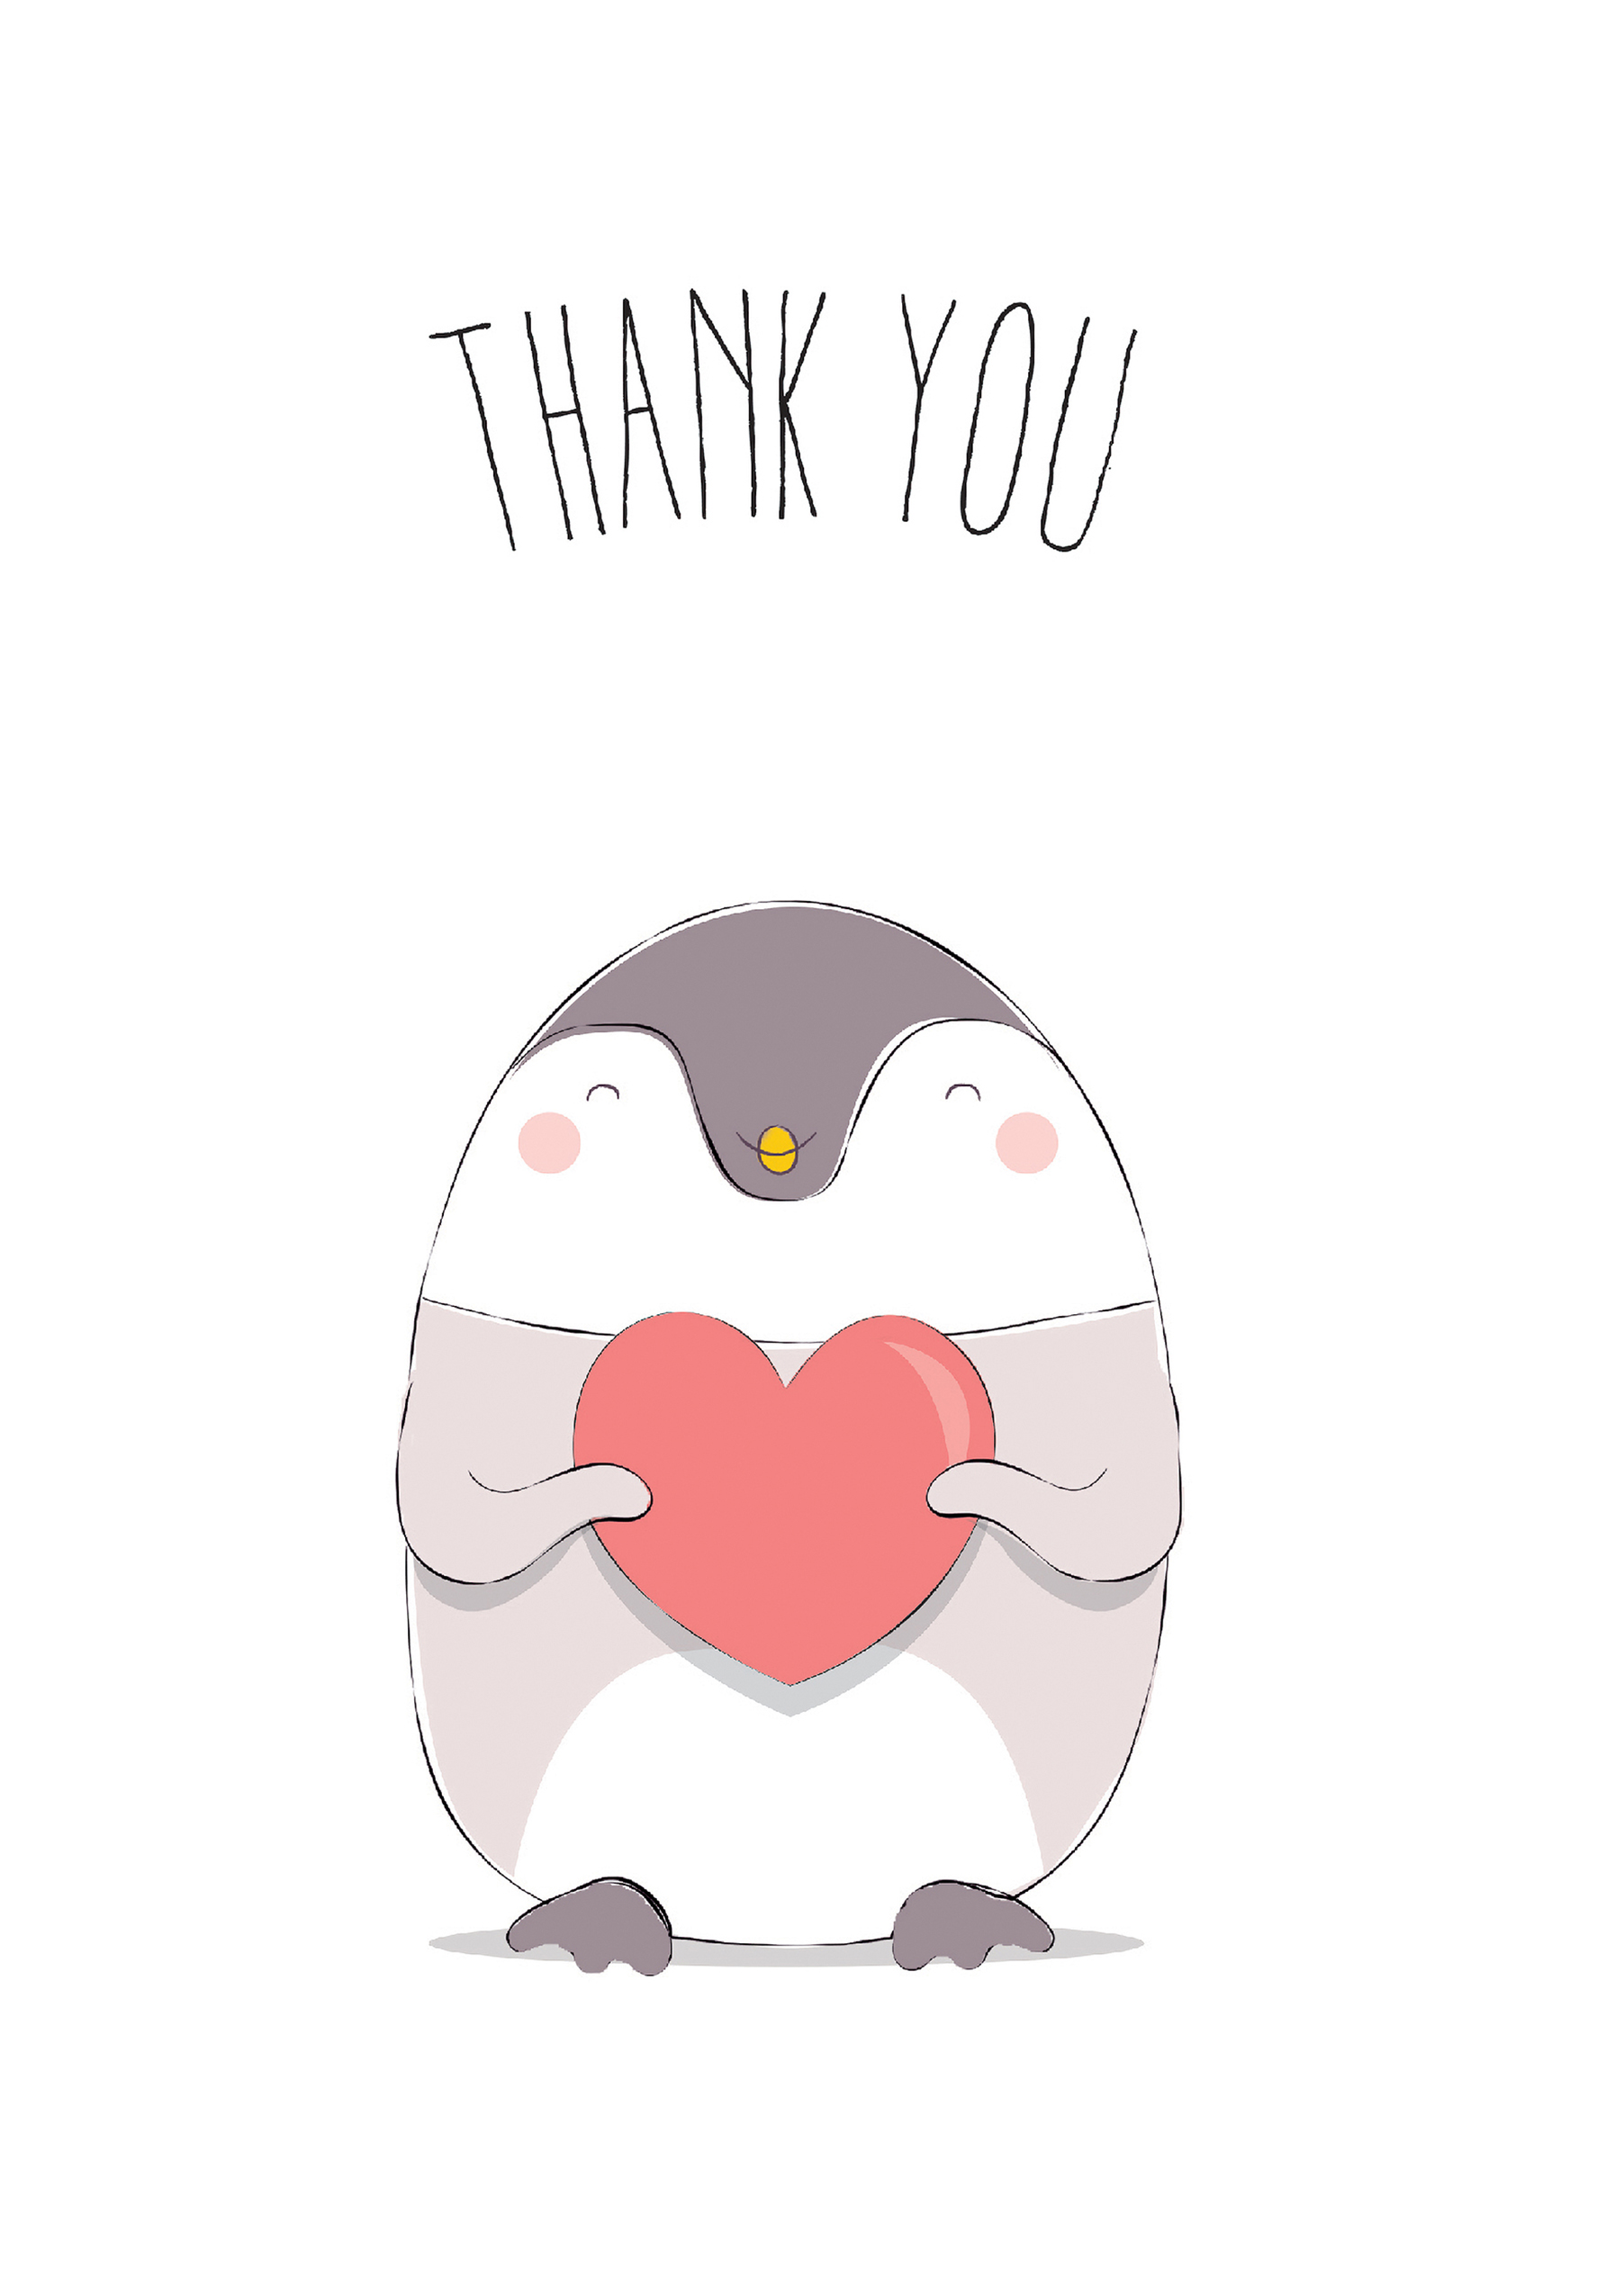 animated thank you greeting | Clipart Panda - Free Clipart Images